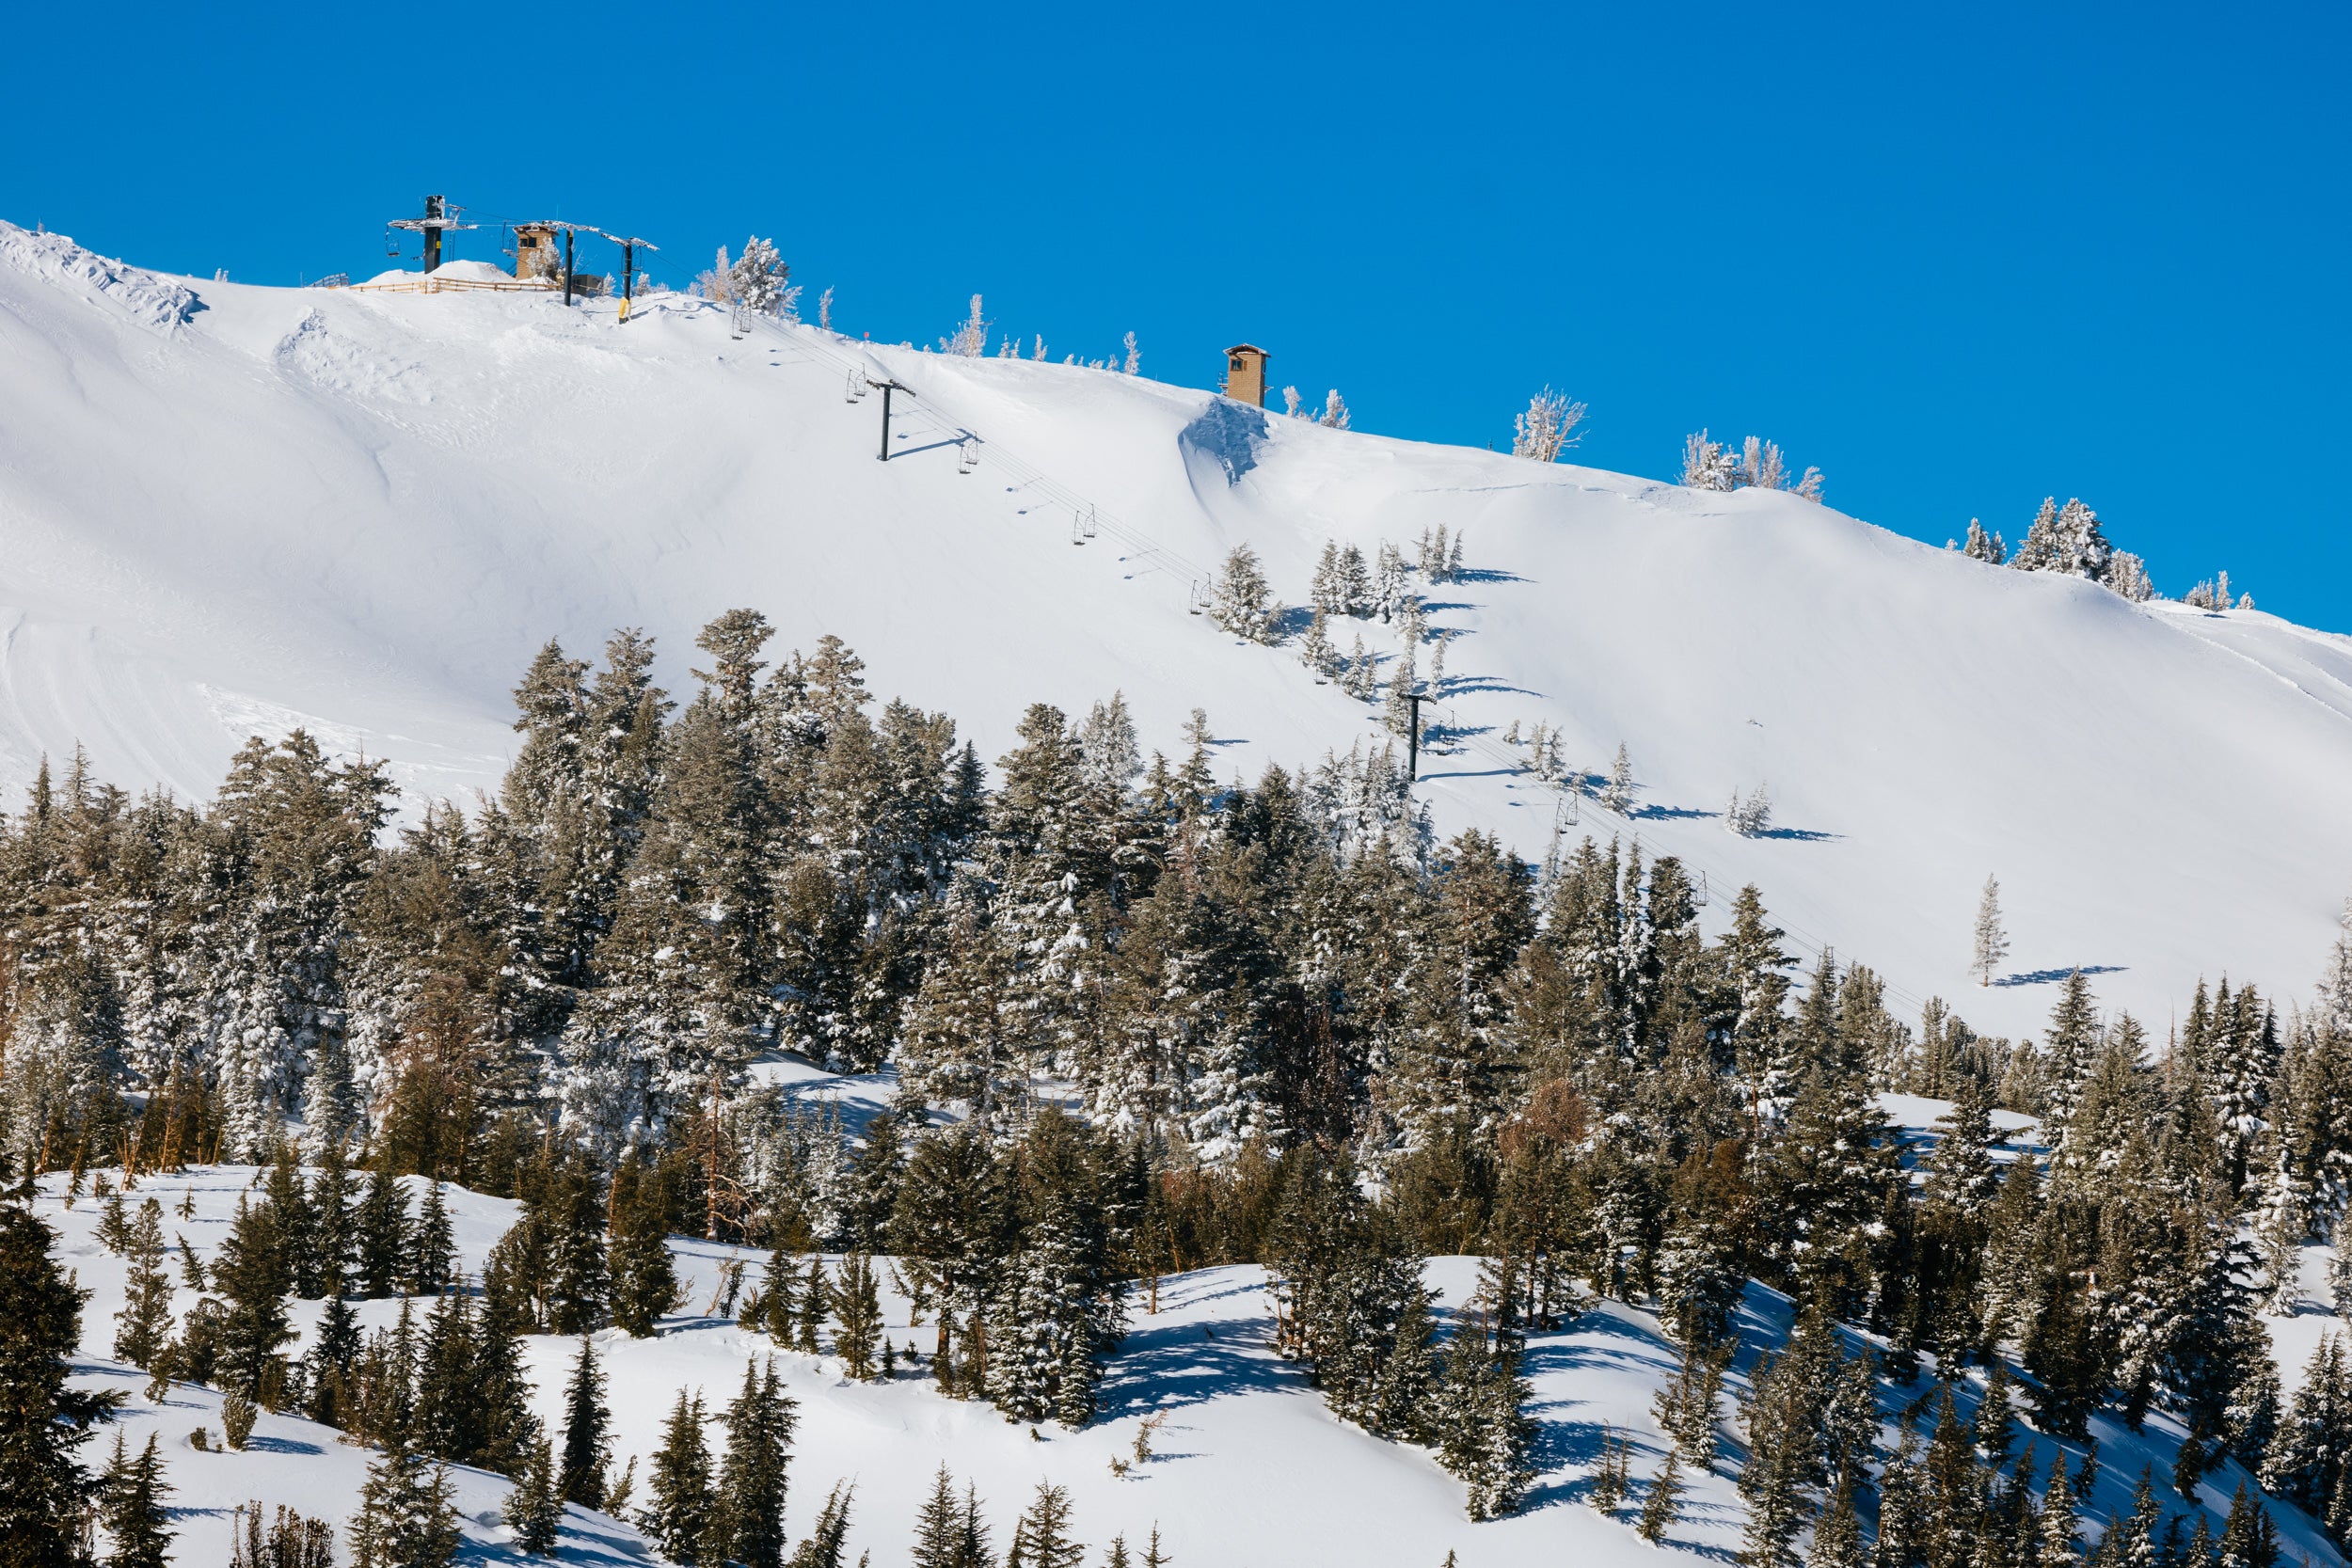 Resorts That Have Extended Their 2022-'23 Ski Season